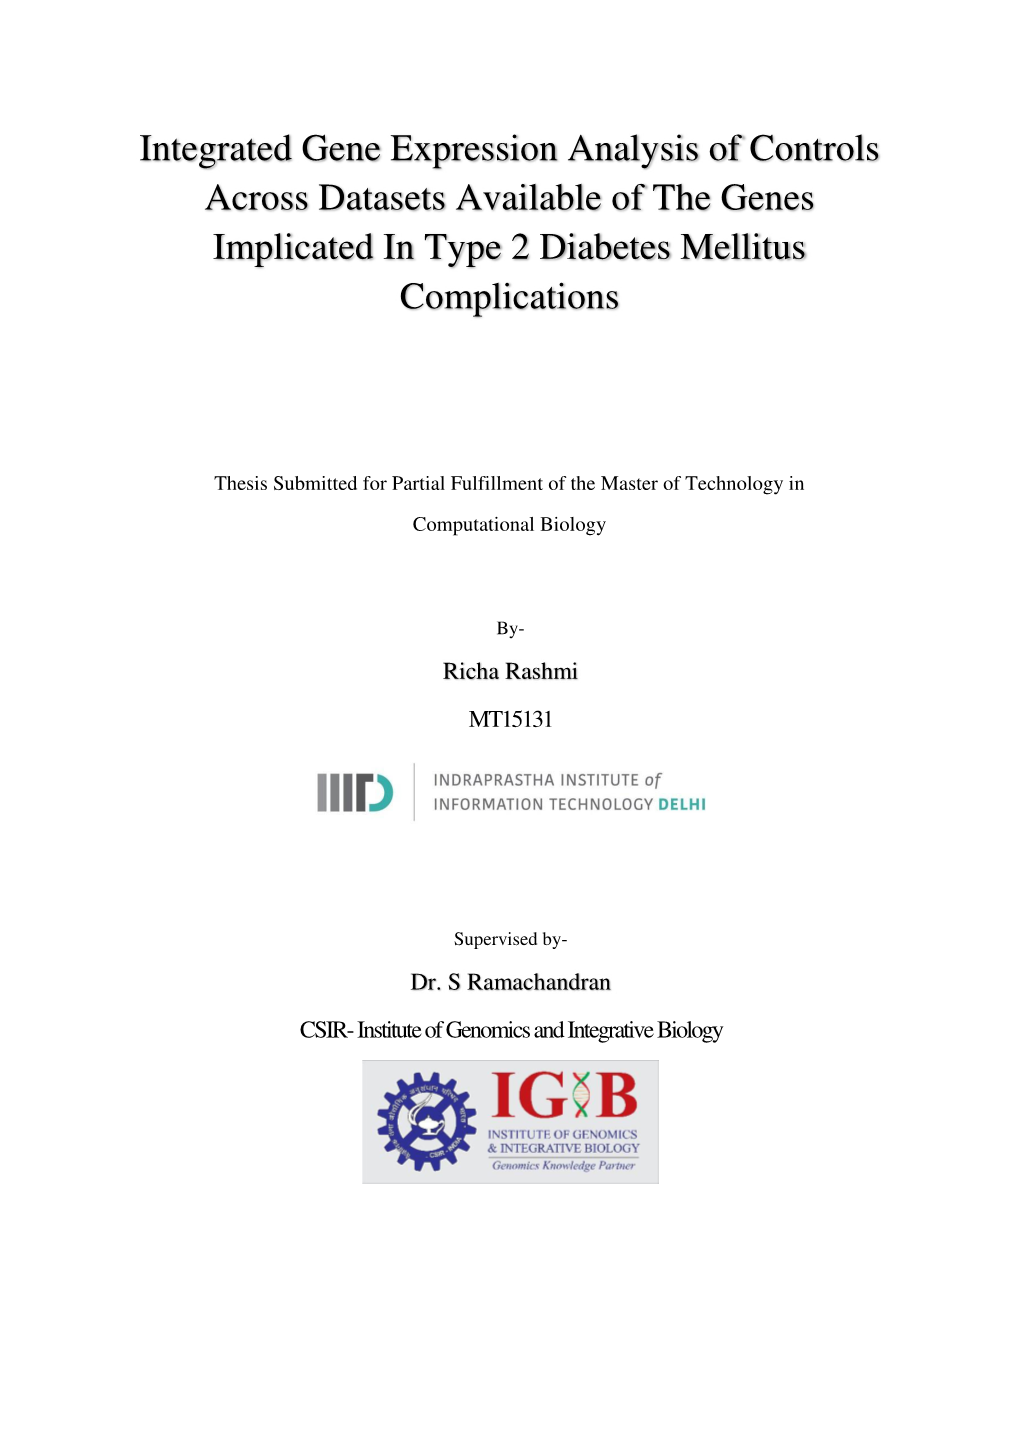 Integrated Gene Expression Analysis of Controls Across Datasets Available of the Genes Implicated in Type 2 Diabetes Mellitus Complications